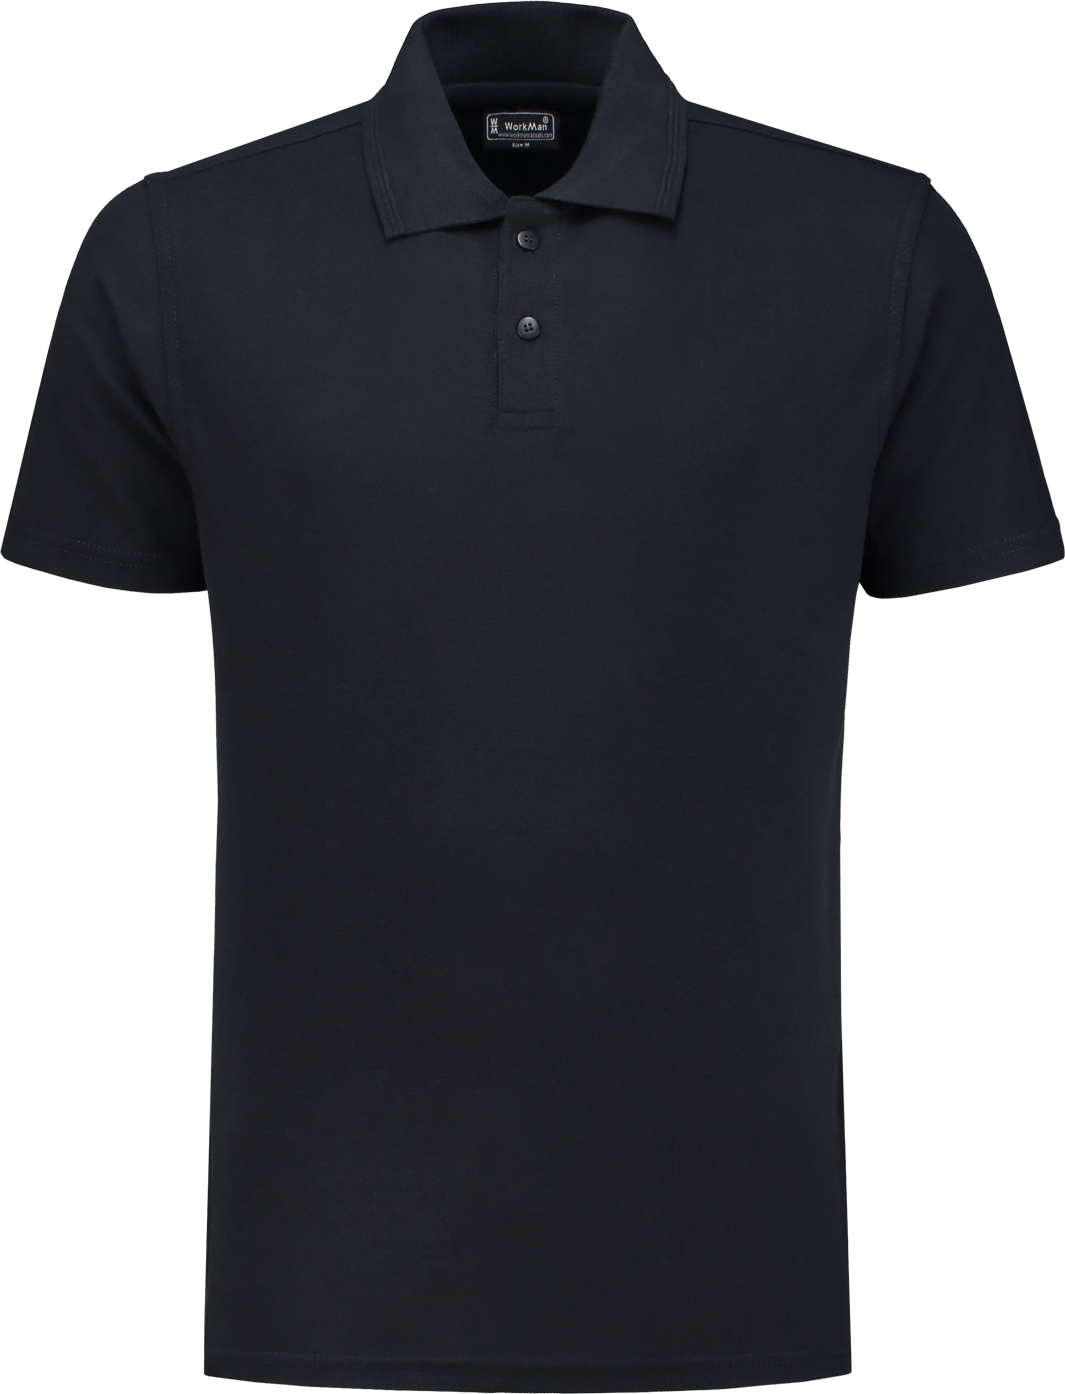 10.6.8102.03 8102 Poloshirt Outfitters Navy L